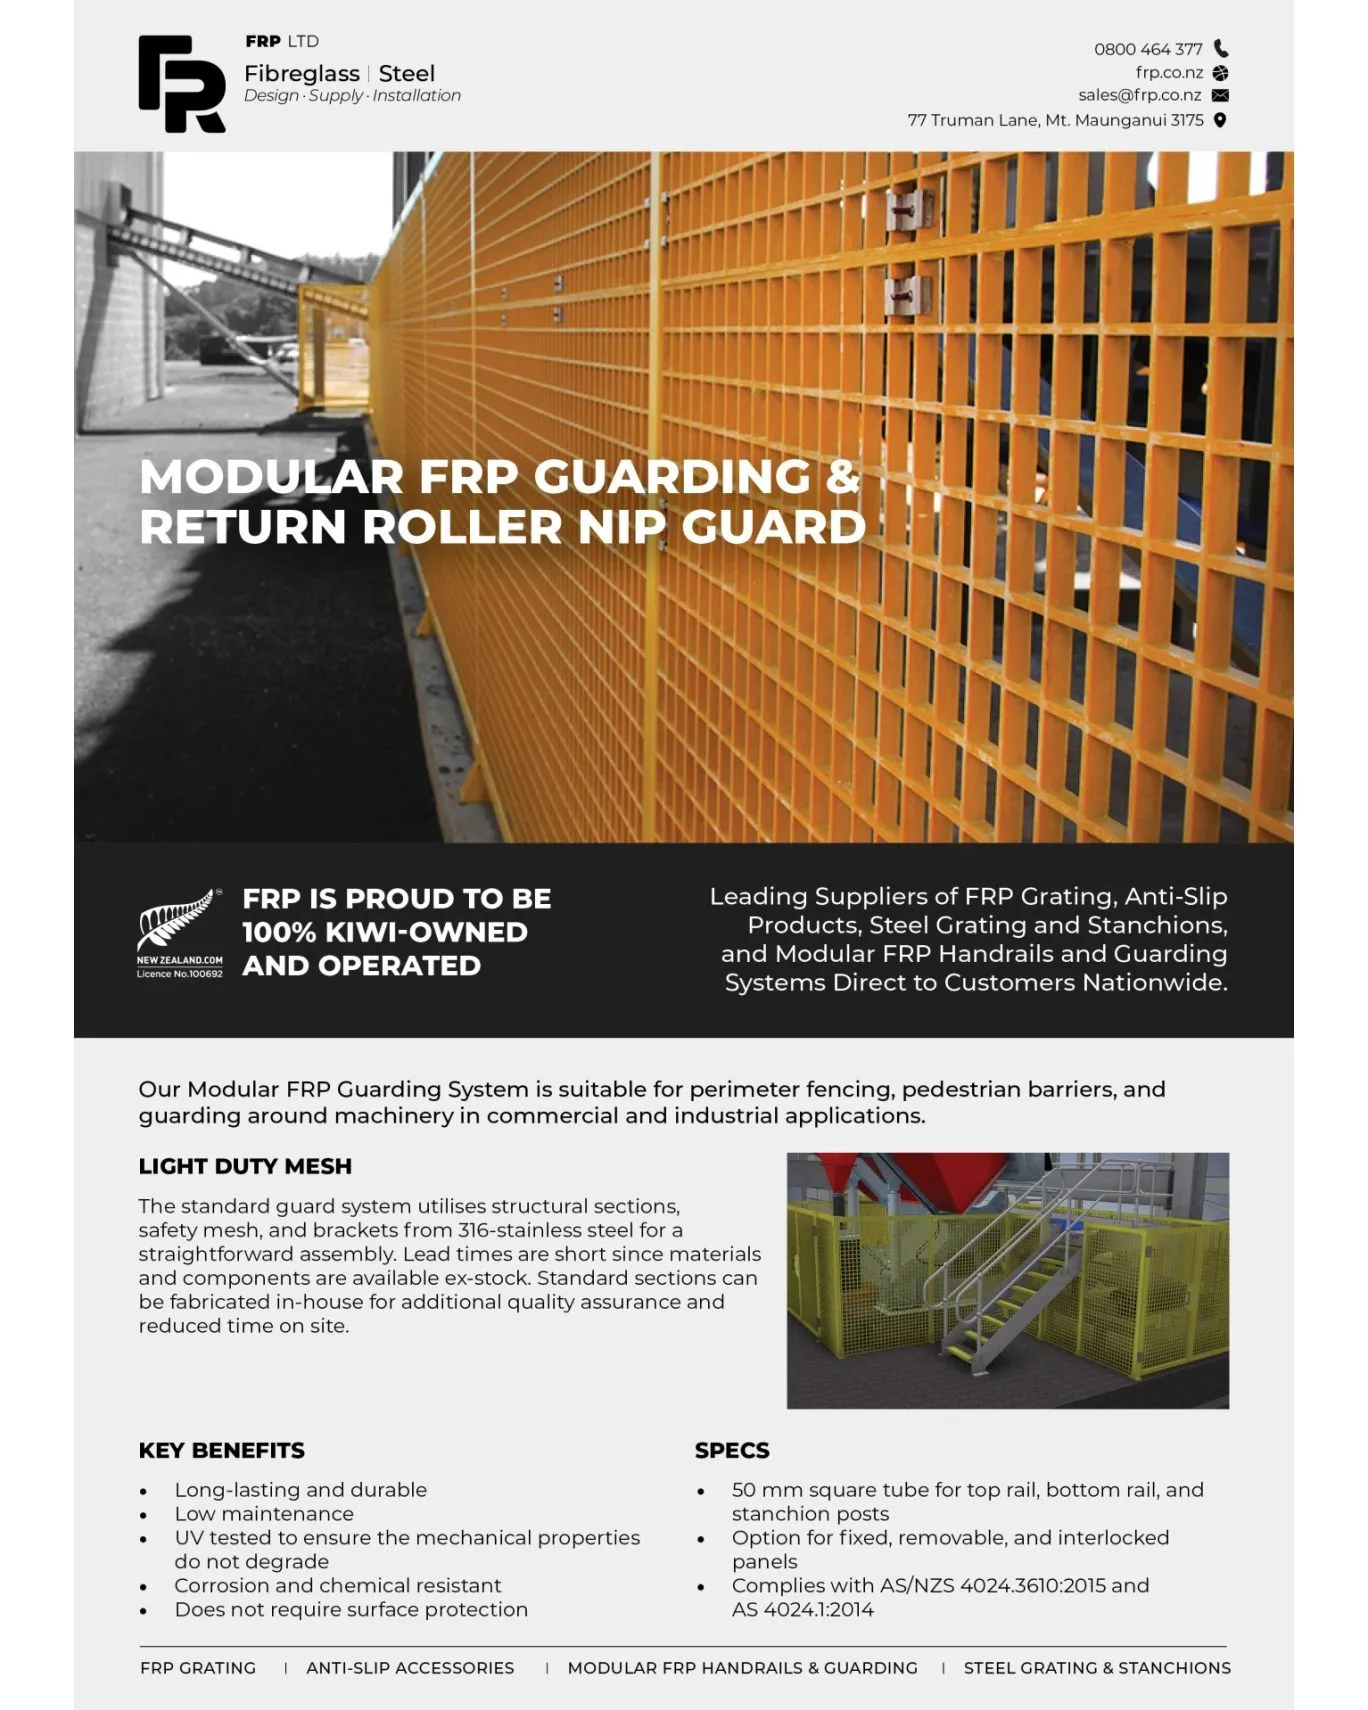 We're here to help.

#frp #frpproducts #guarding #machineguarding #industrial #commercial #engineers #engineering #nzconstruction #nzarchitects